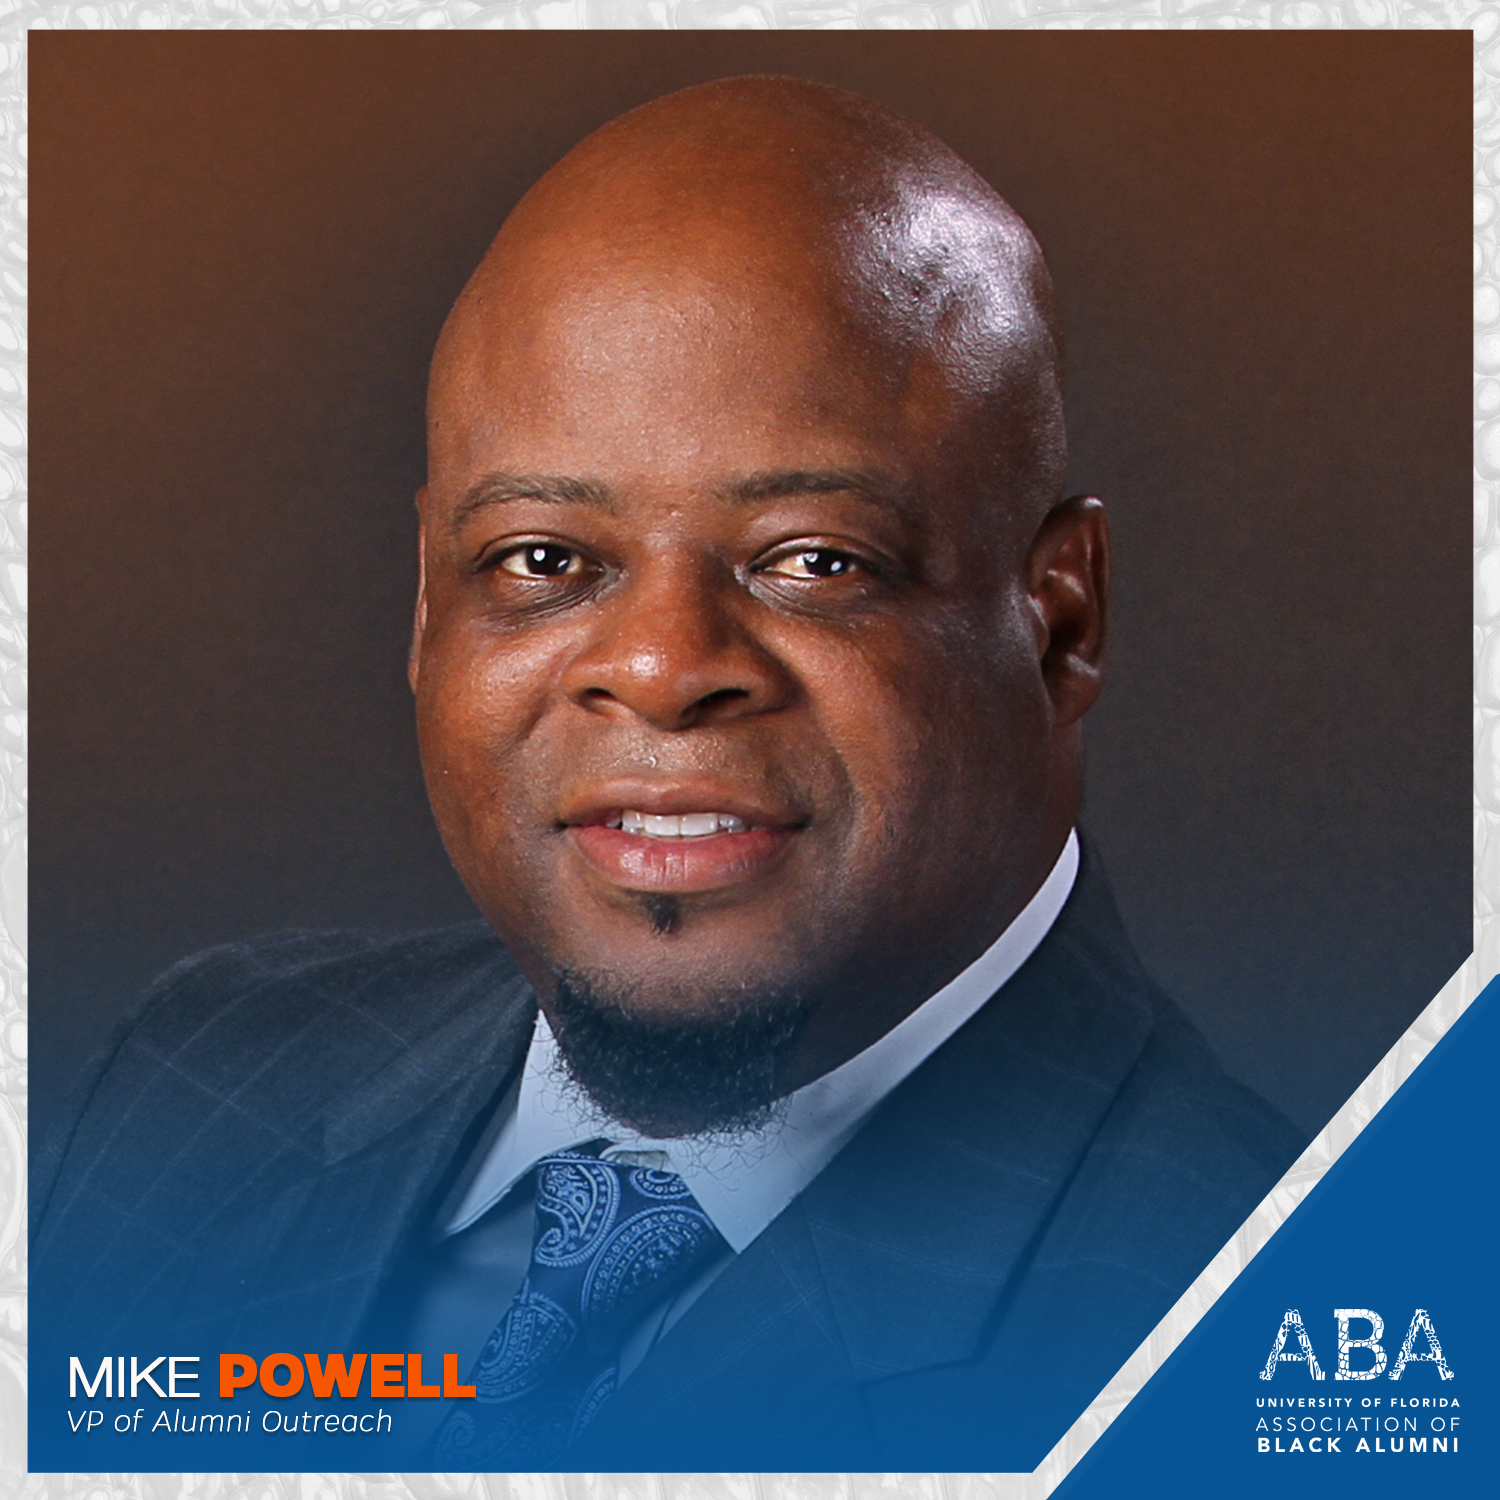 Mike Powell